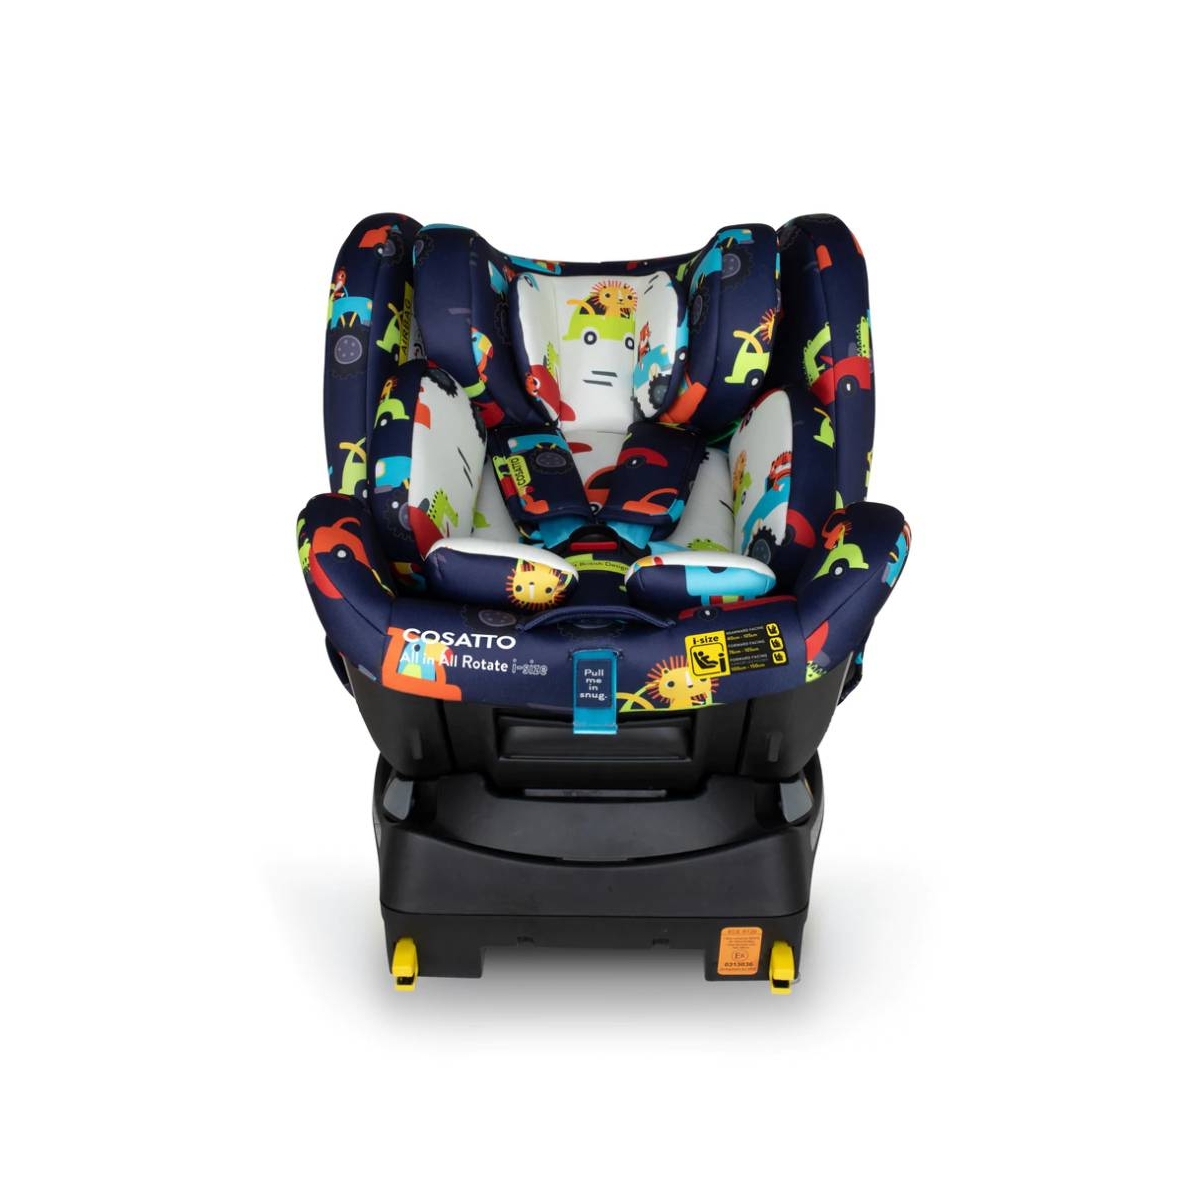 Cosatto All in All Rotate I-Size Group 0+123 Car Seat